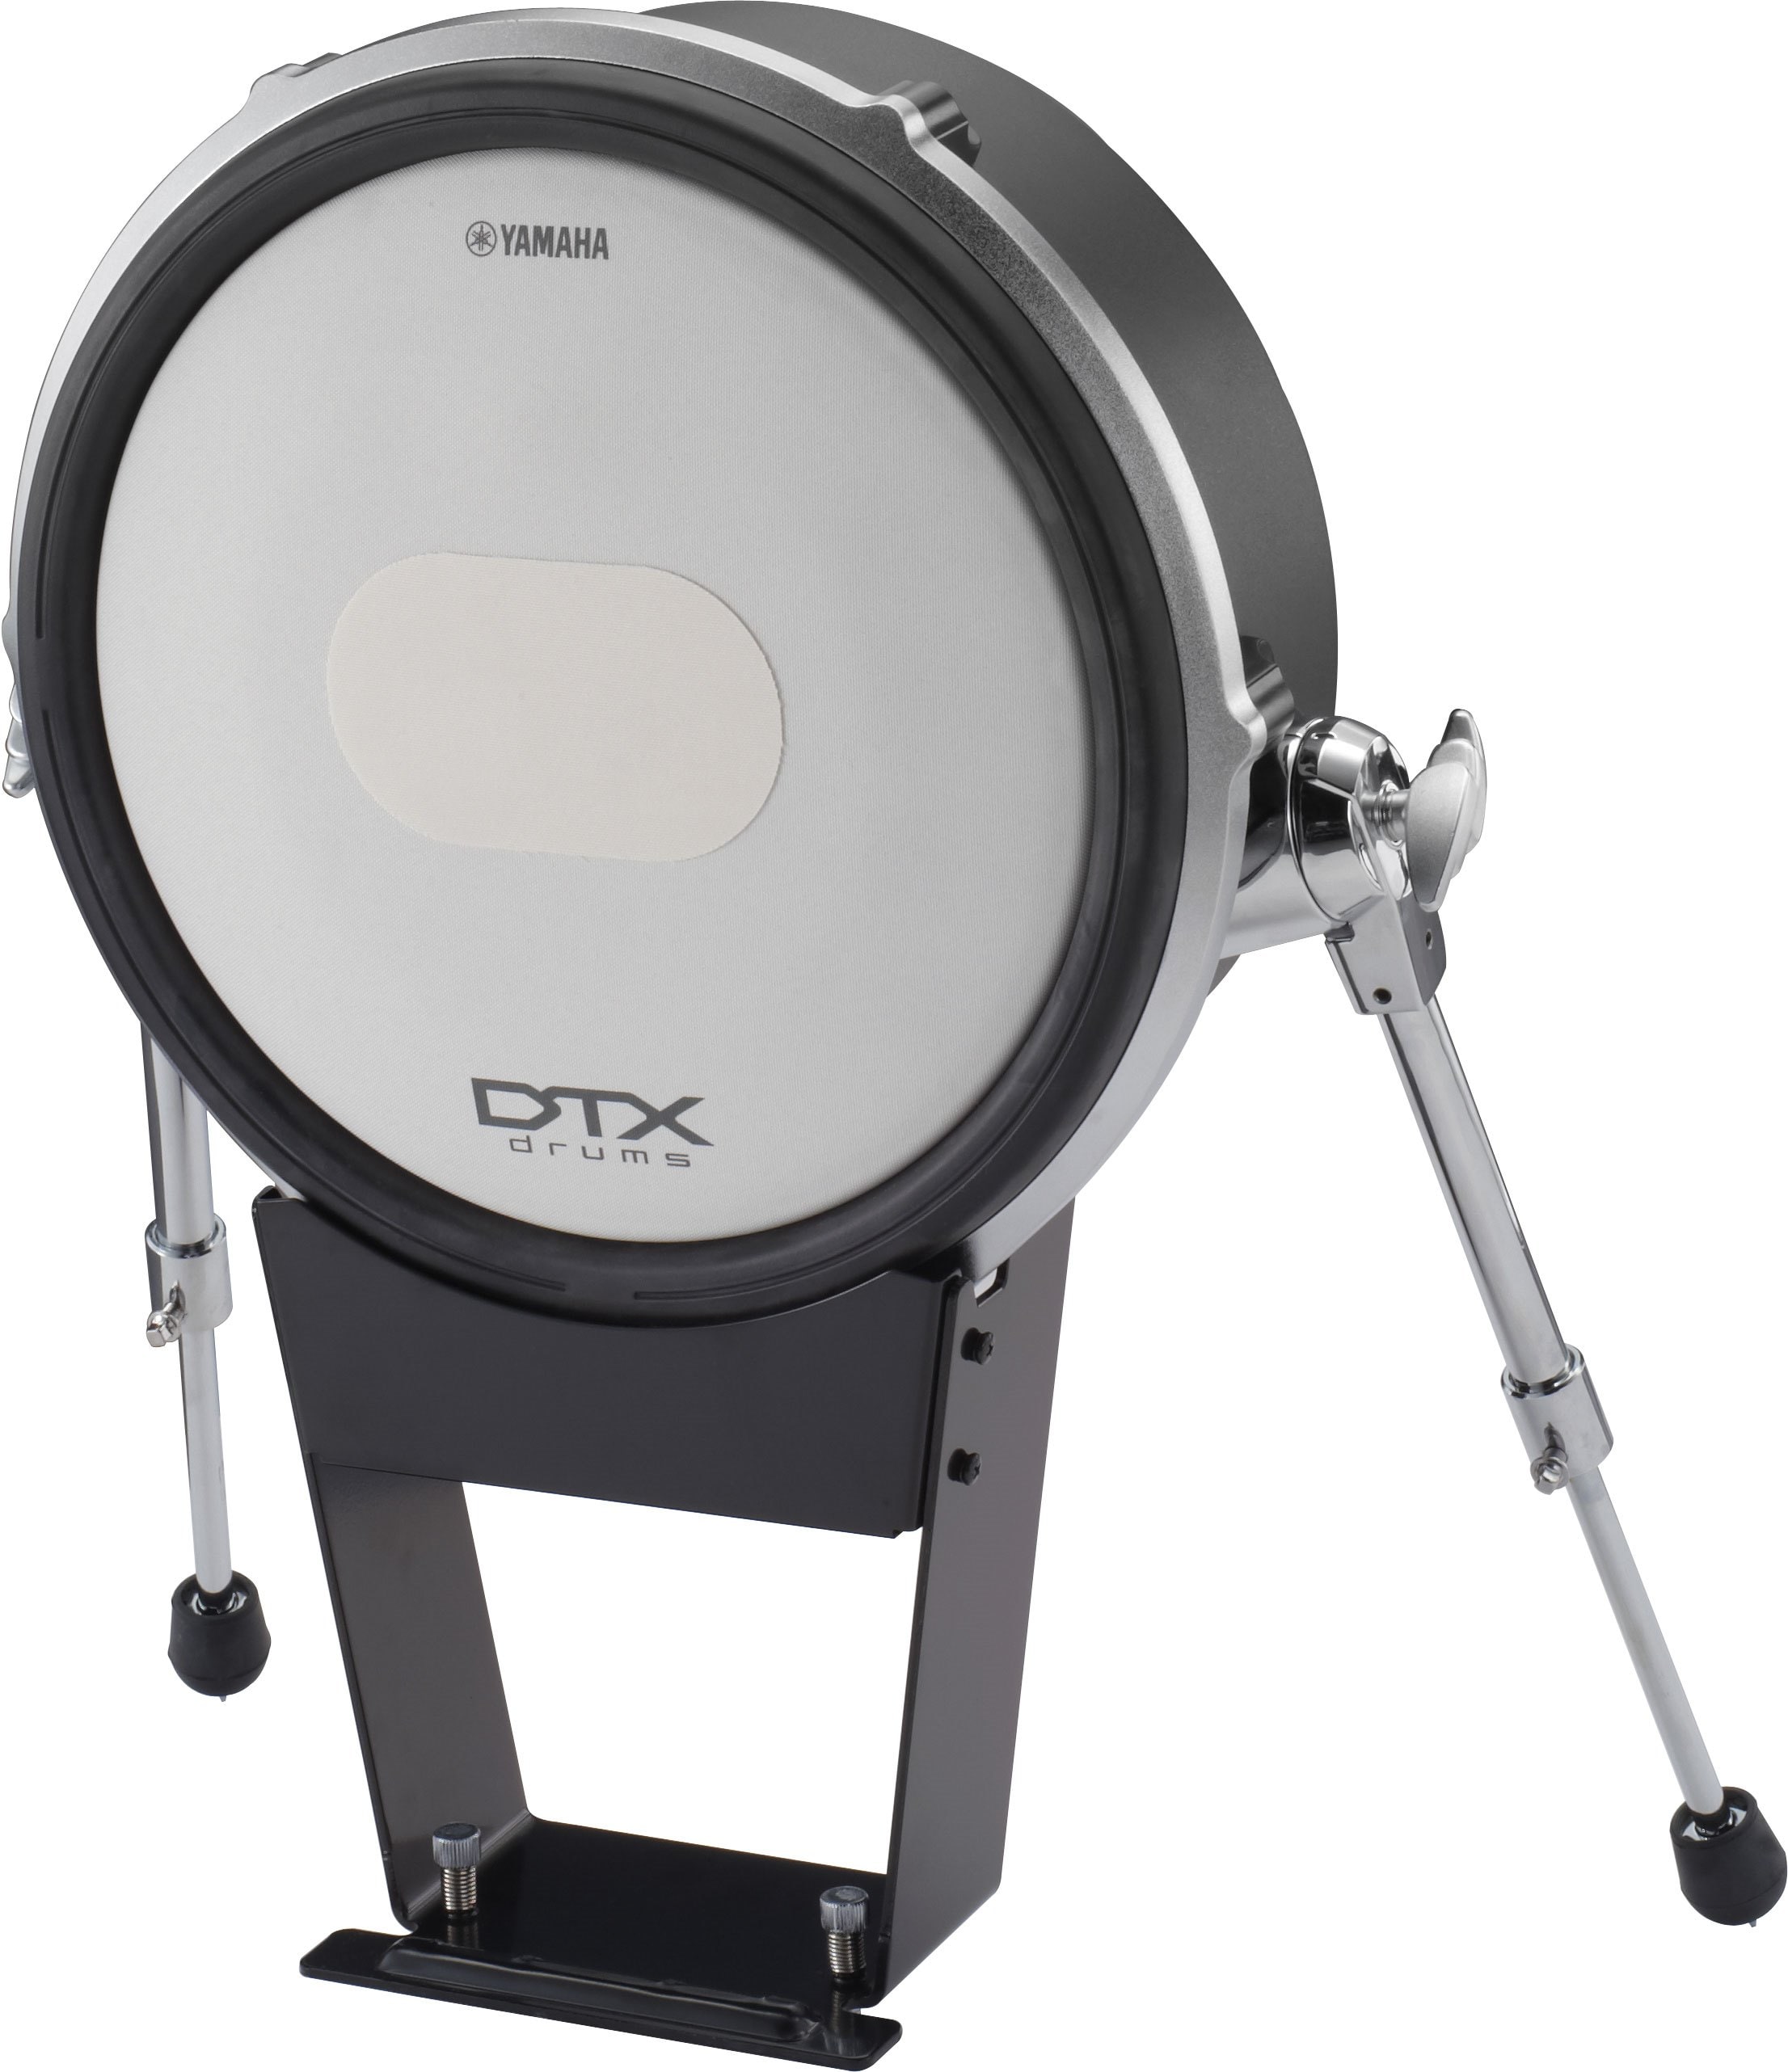 KP125W - Gallery - Electronic Drum Snare, Tom, Kick and Cymbal